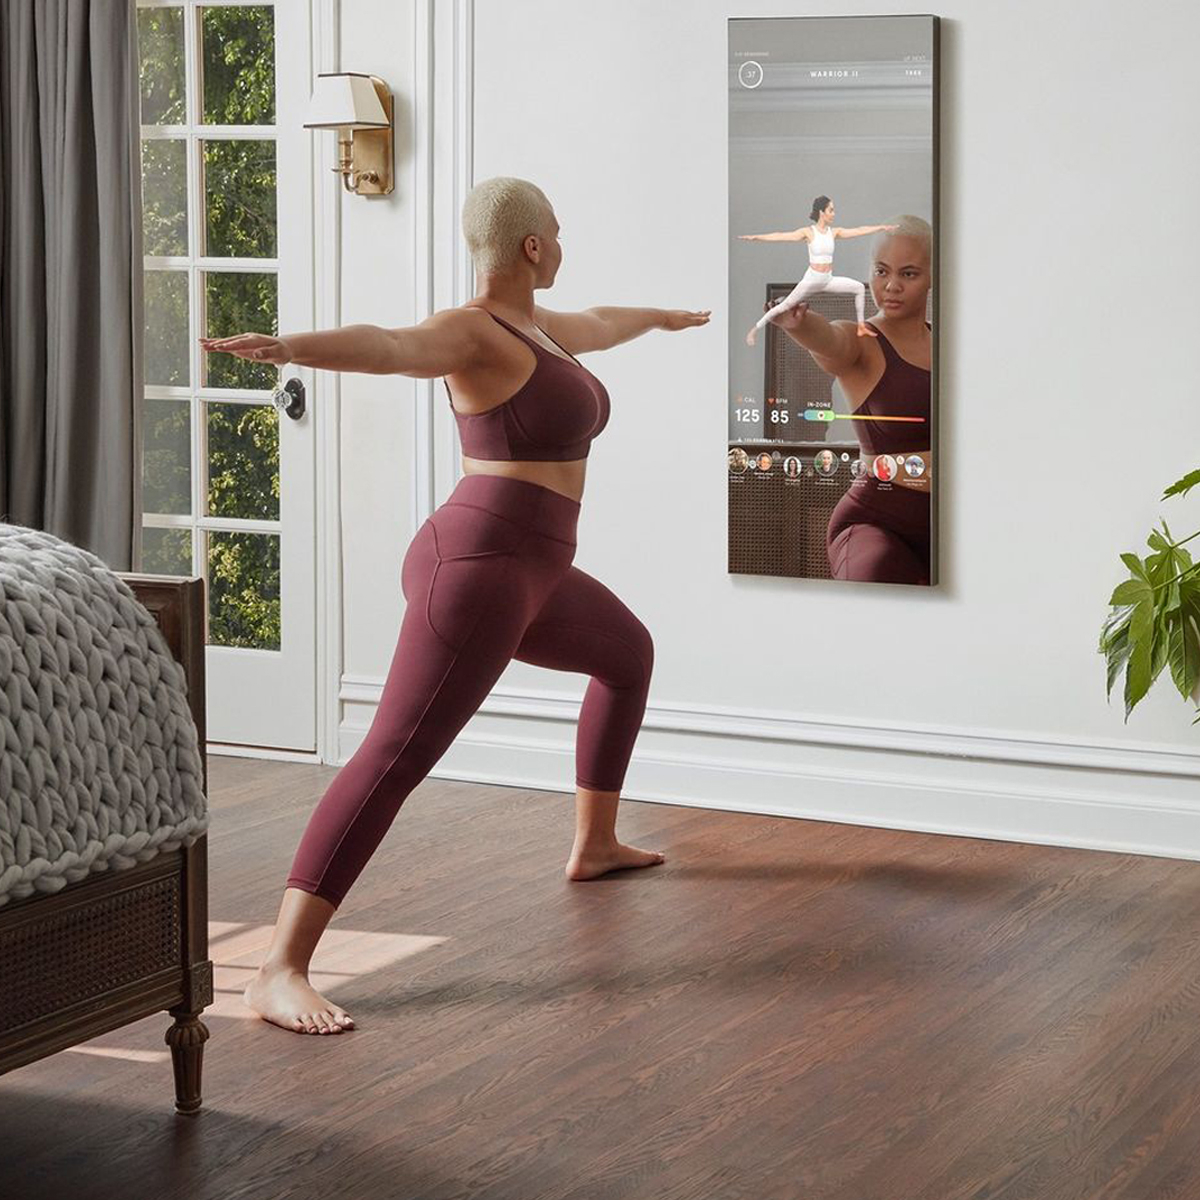 Lululemon Wants Out Of Struggling Connected Fitness Space